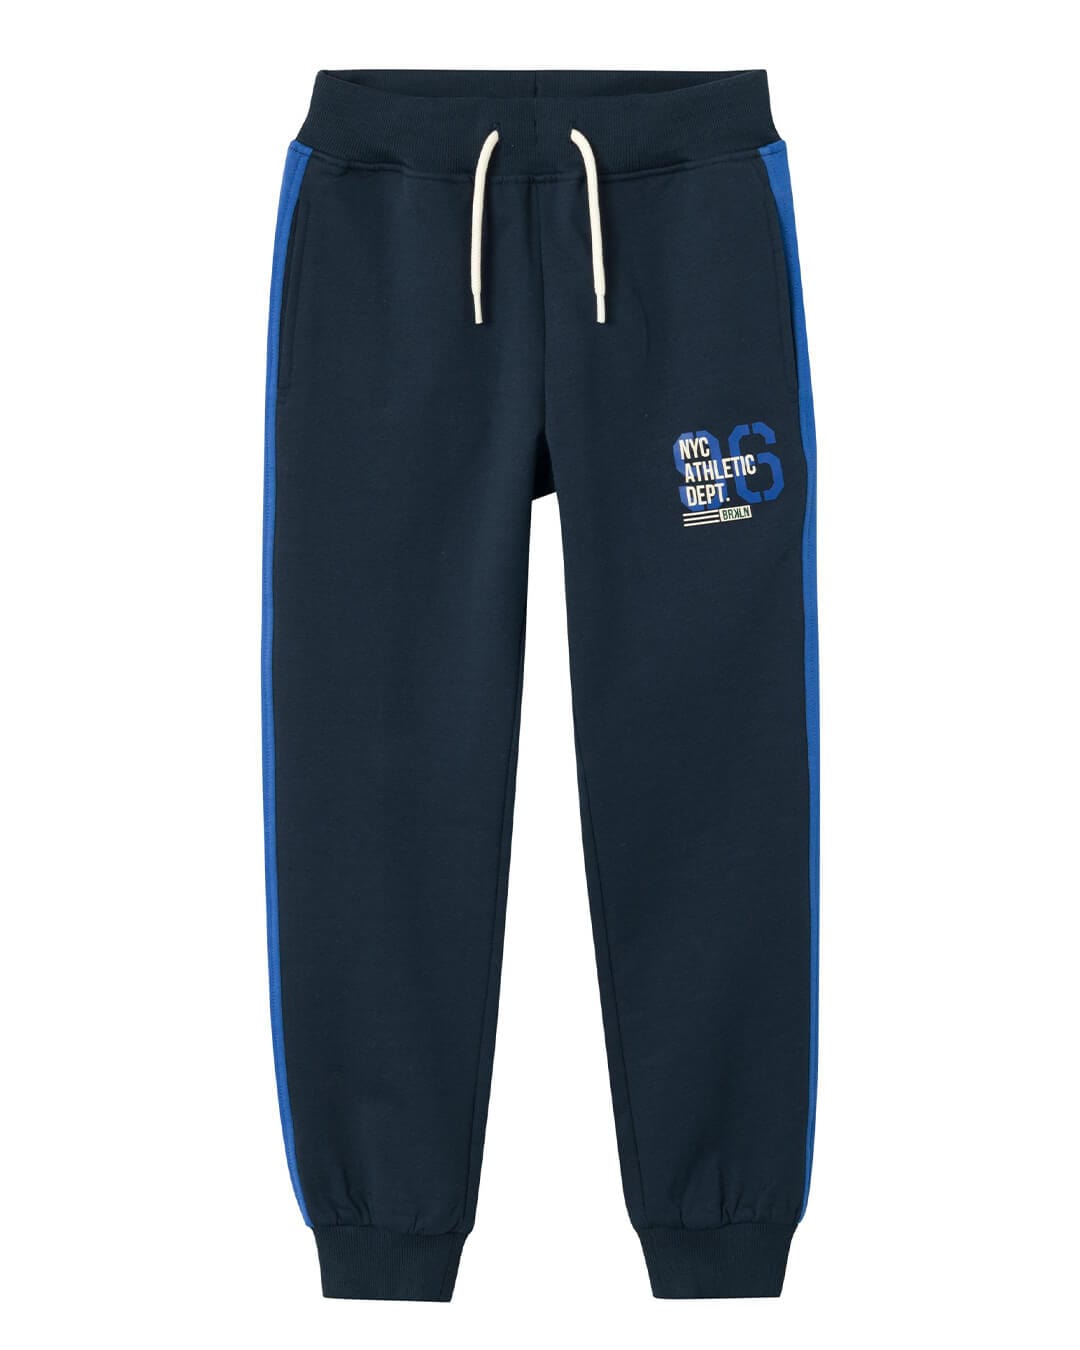 Name It Trousers Name It NYC Athletic Navy Sweat Trousers